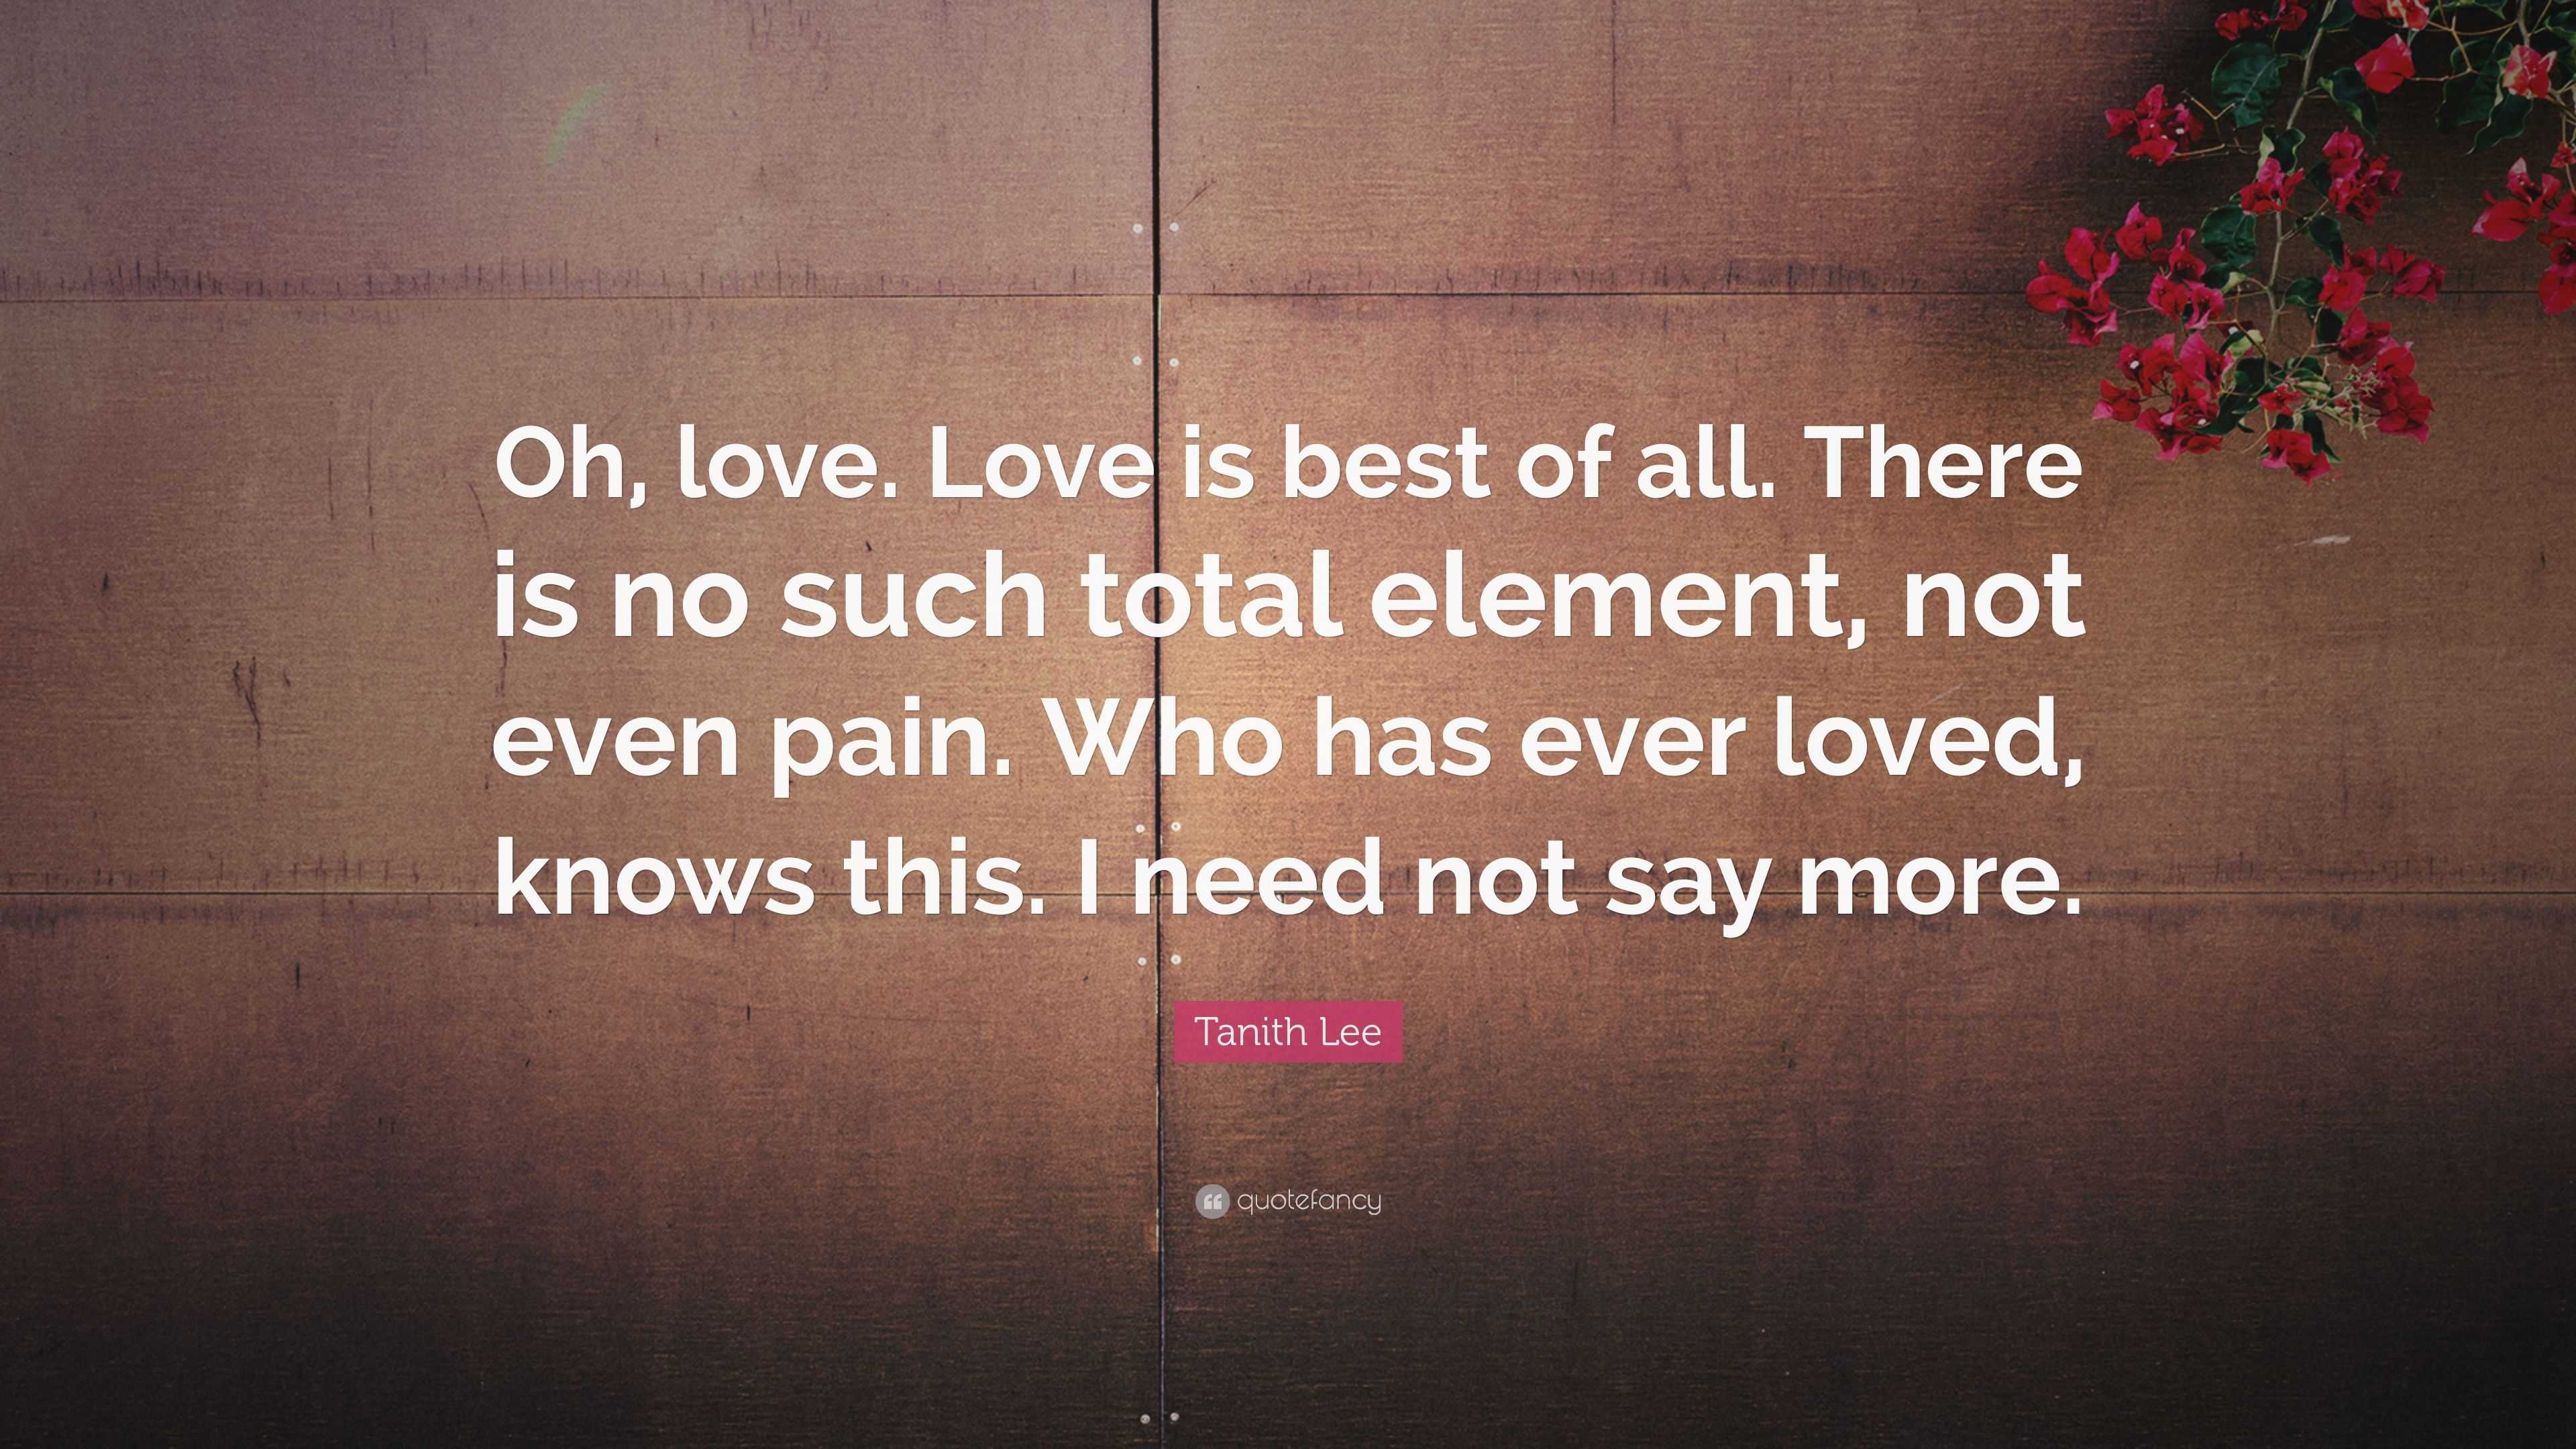 Tanith Lee Quote: “Oh, love. Love is best of all. There is no such ...